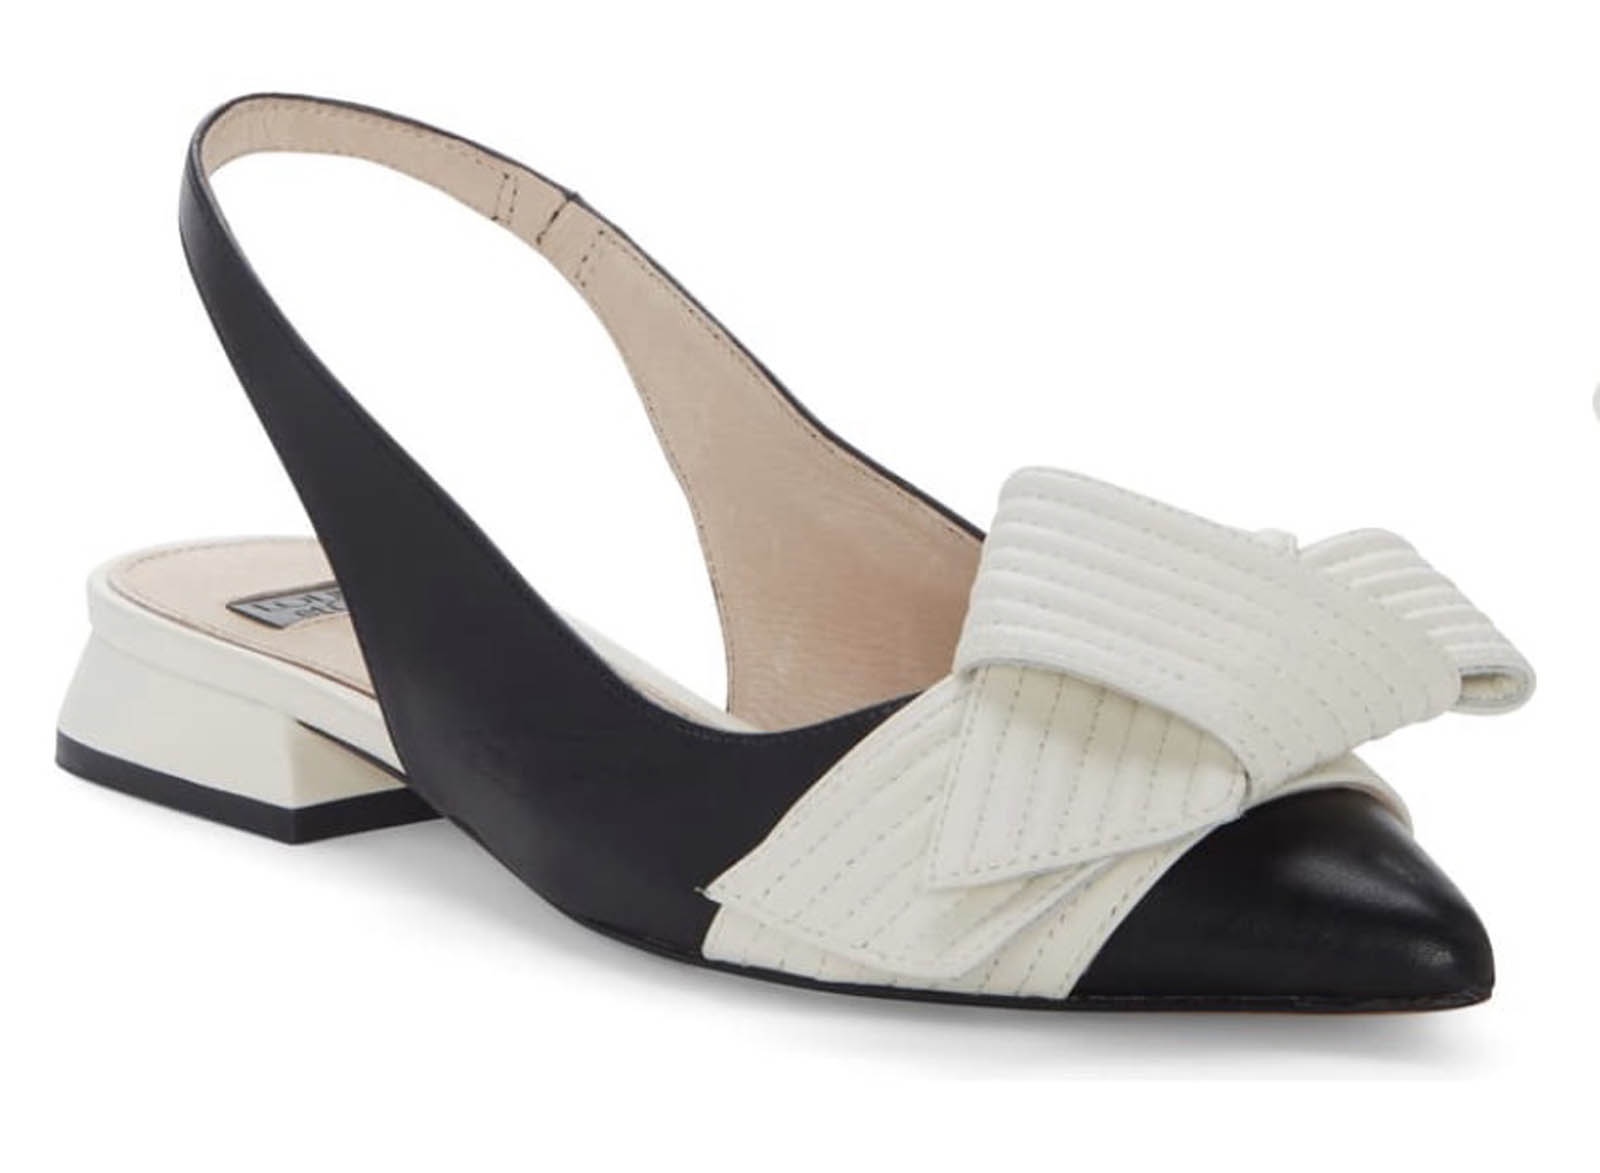 Black & White Leather Slingback Pump with Bow Detail